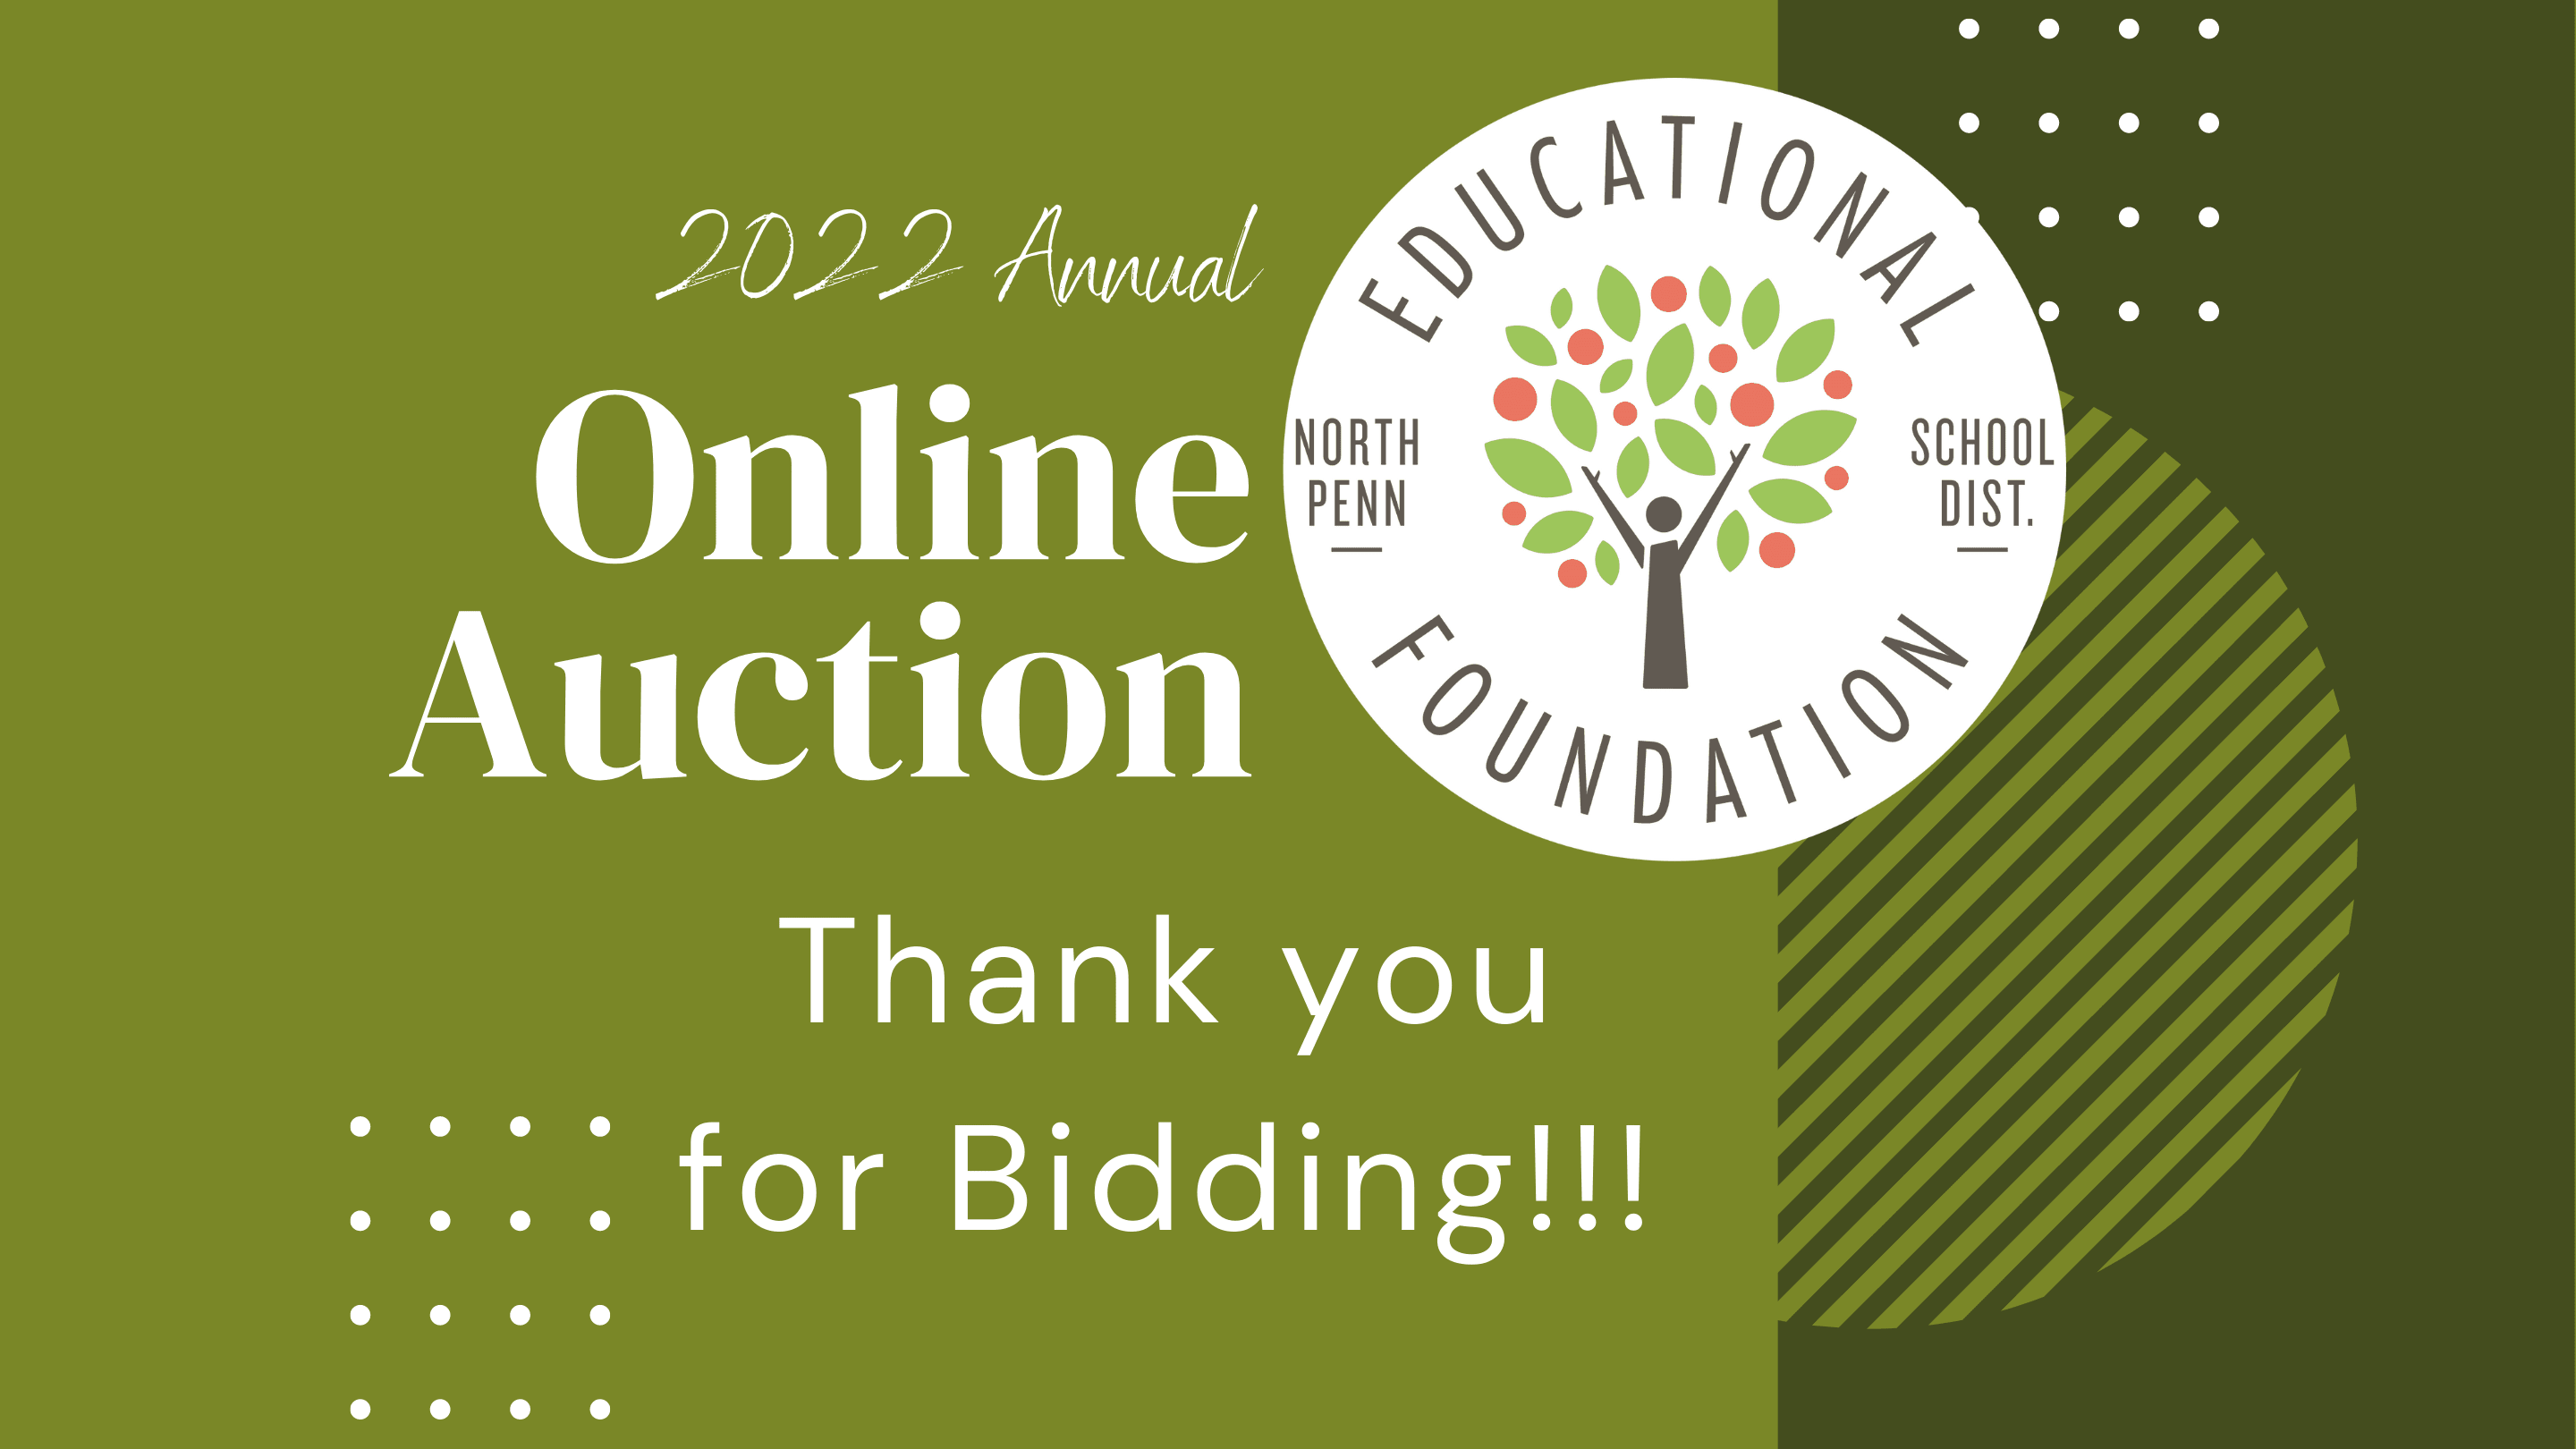 Thank You for Bidding in our 2022 Annual Online Auction!!!